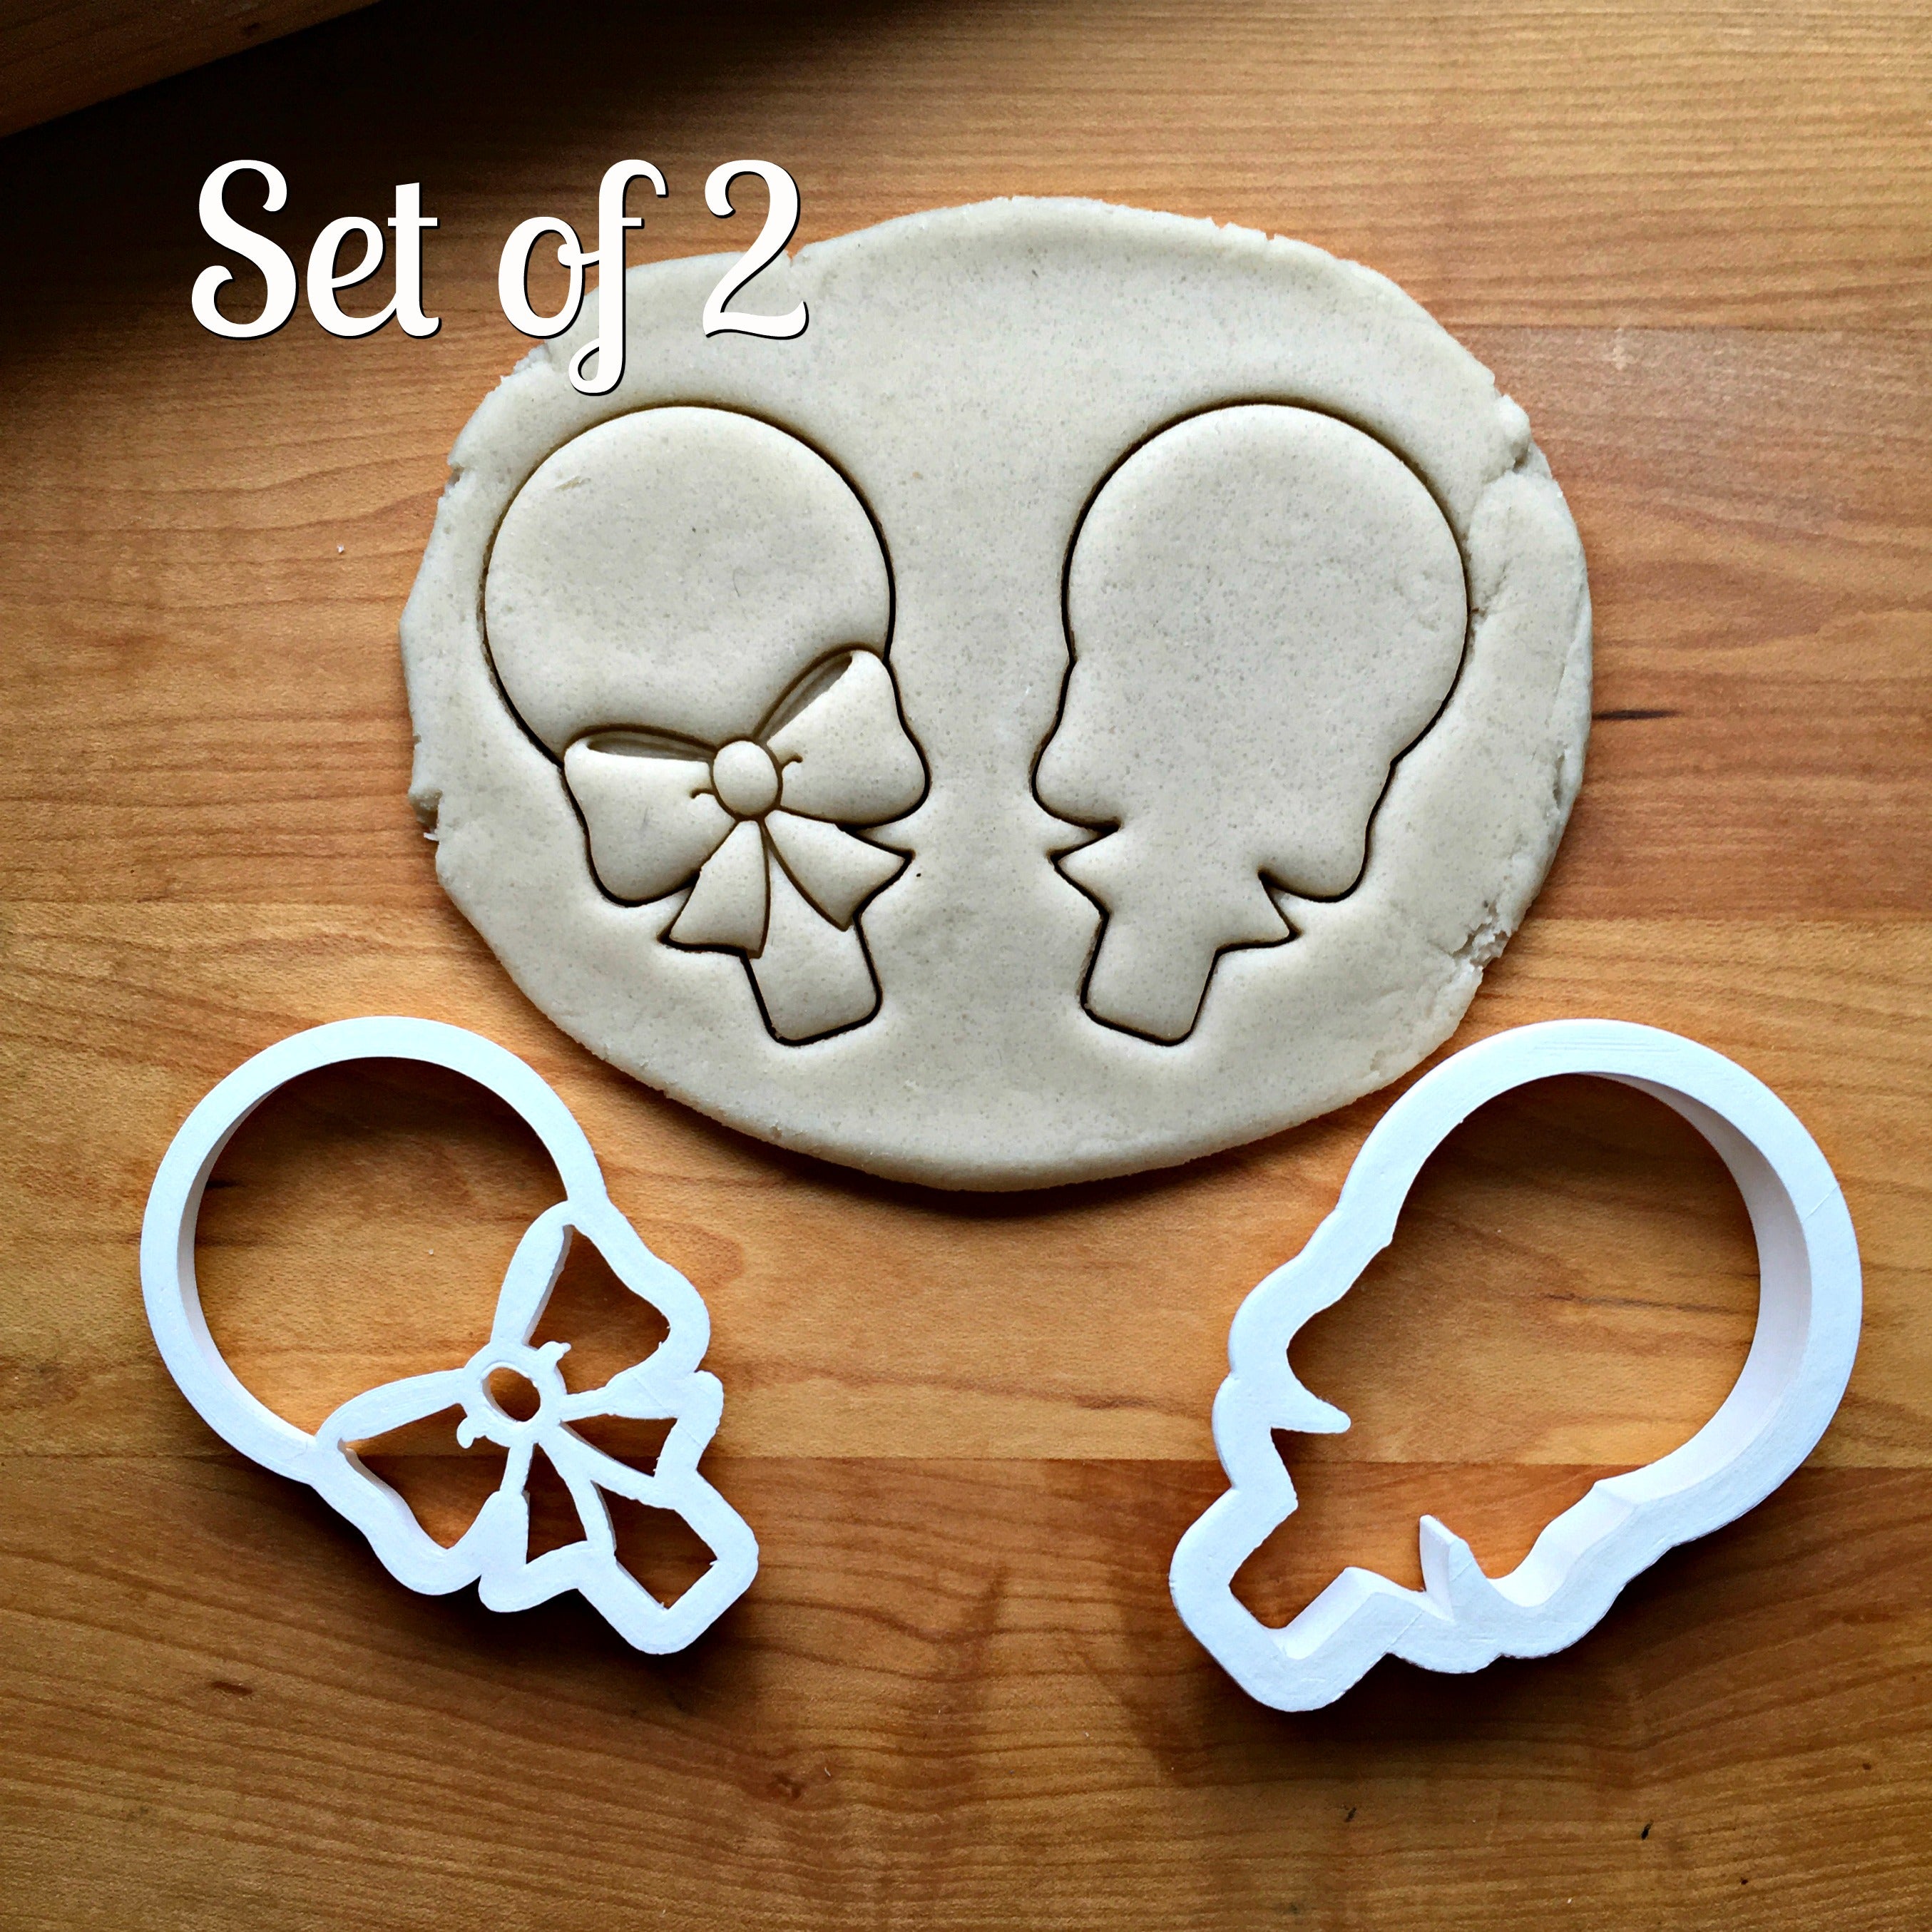 Set of 2 Lollipop/Sucker with Bow Cookie Cutters/Dishwasher Safe